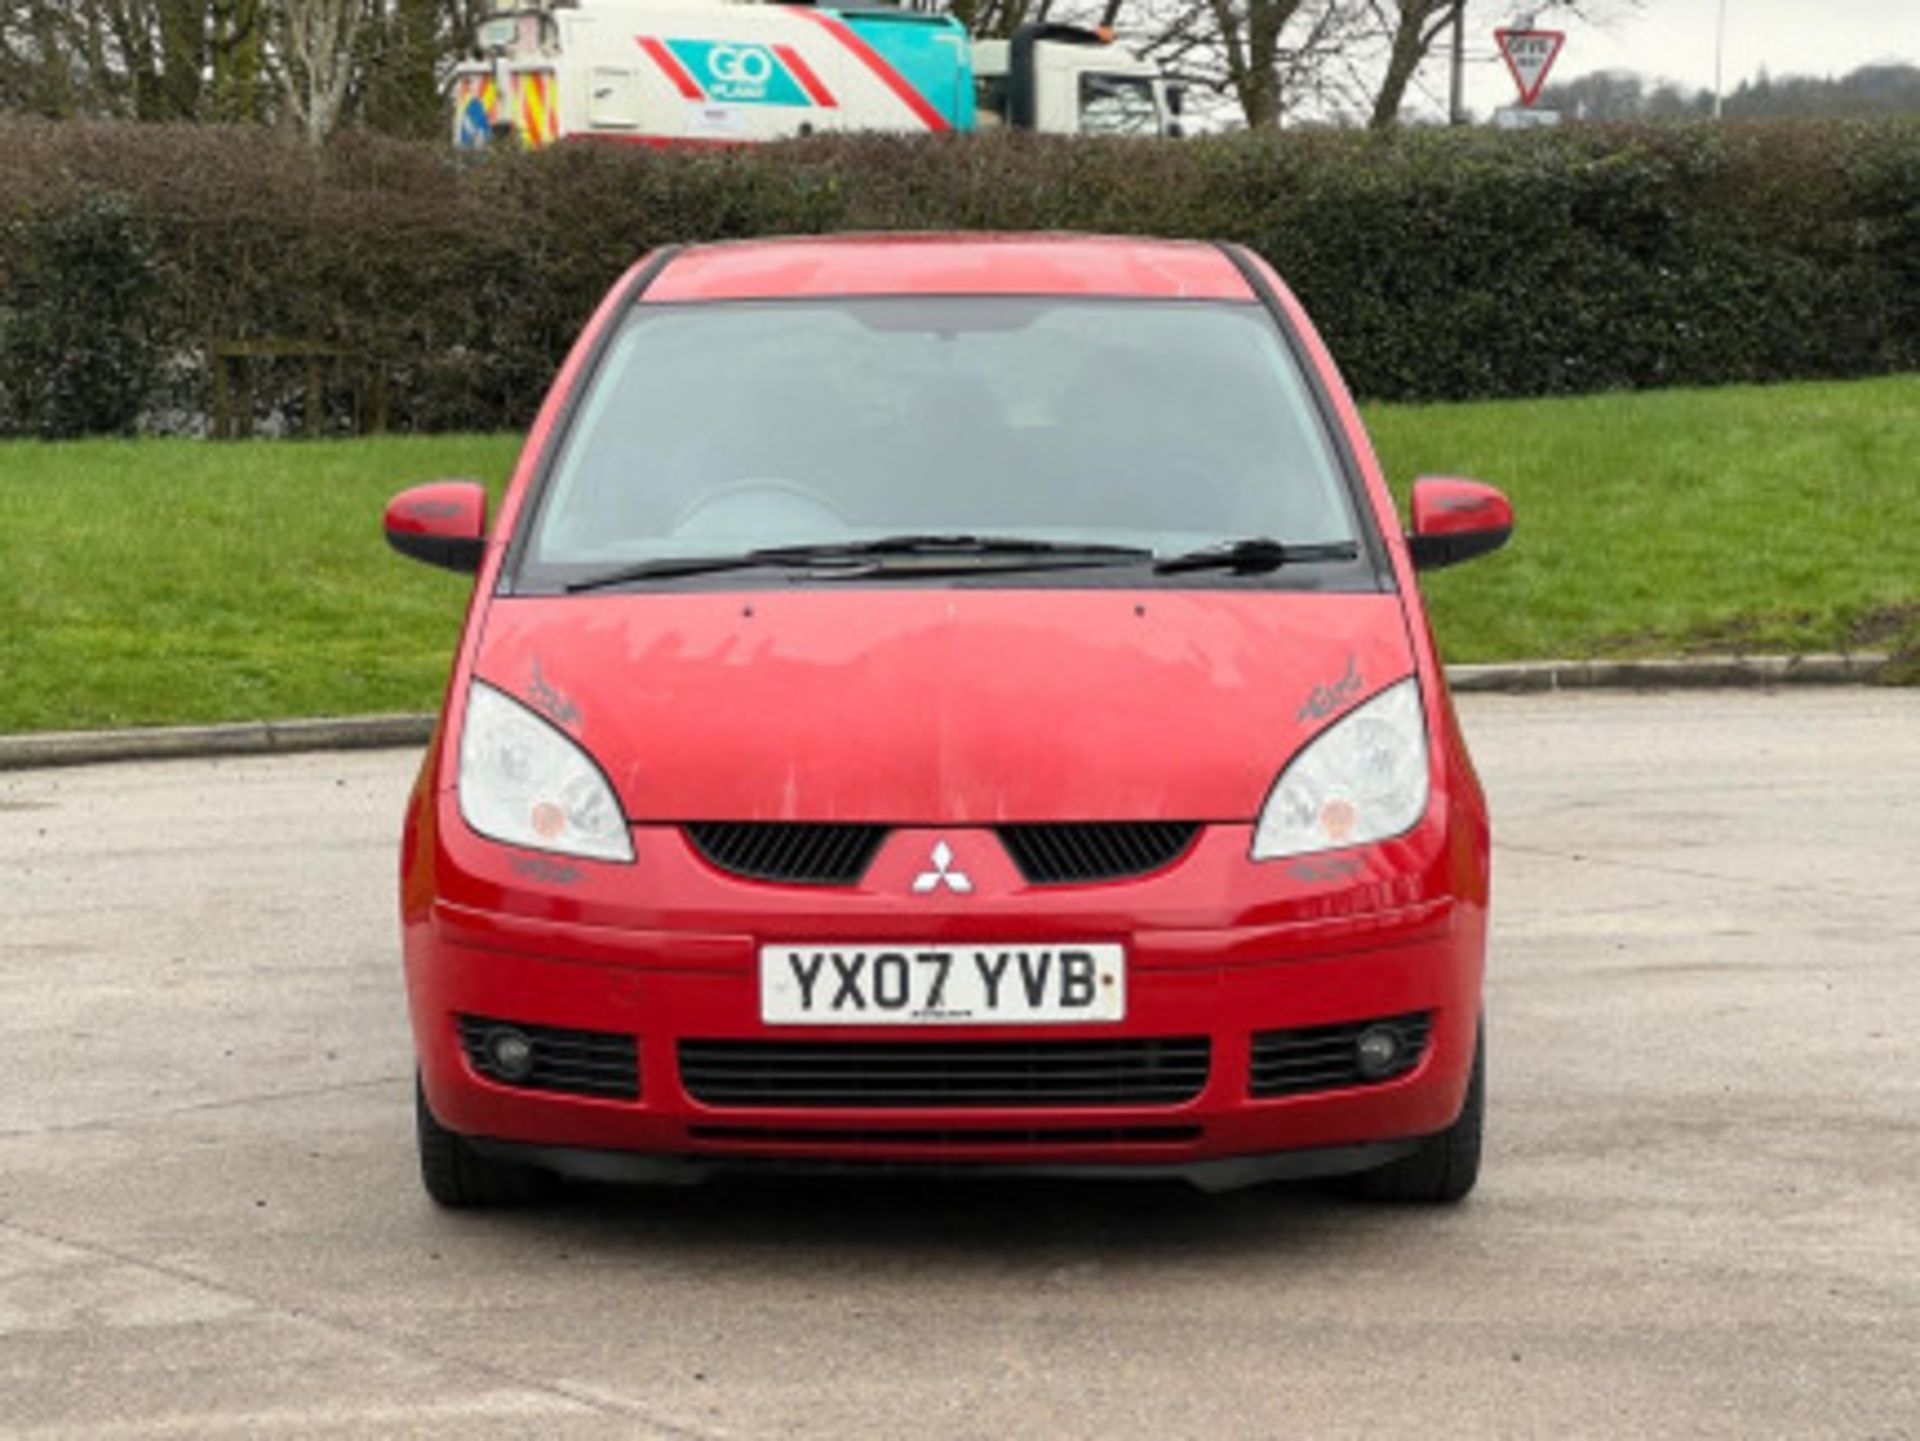 2007 MITSUBISHI COLT 1.5 DI-D DIESEL AUTOMATIC >>--NO VAT ON HAMMER--<< - Image 58 of 127